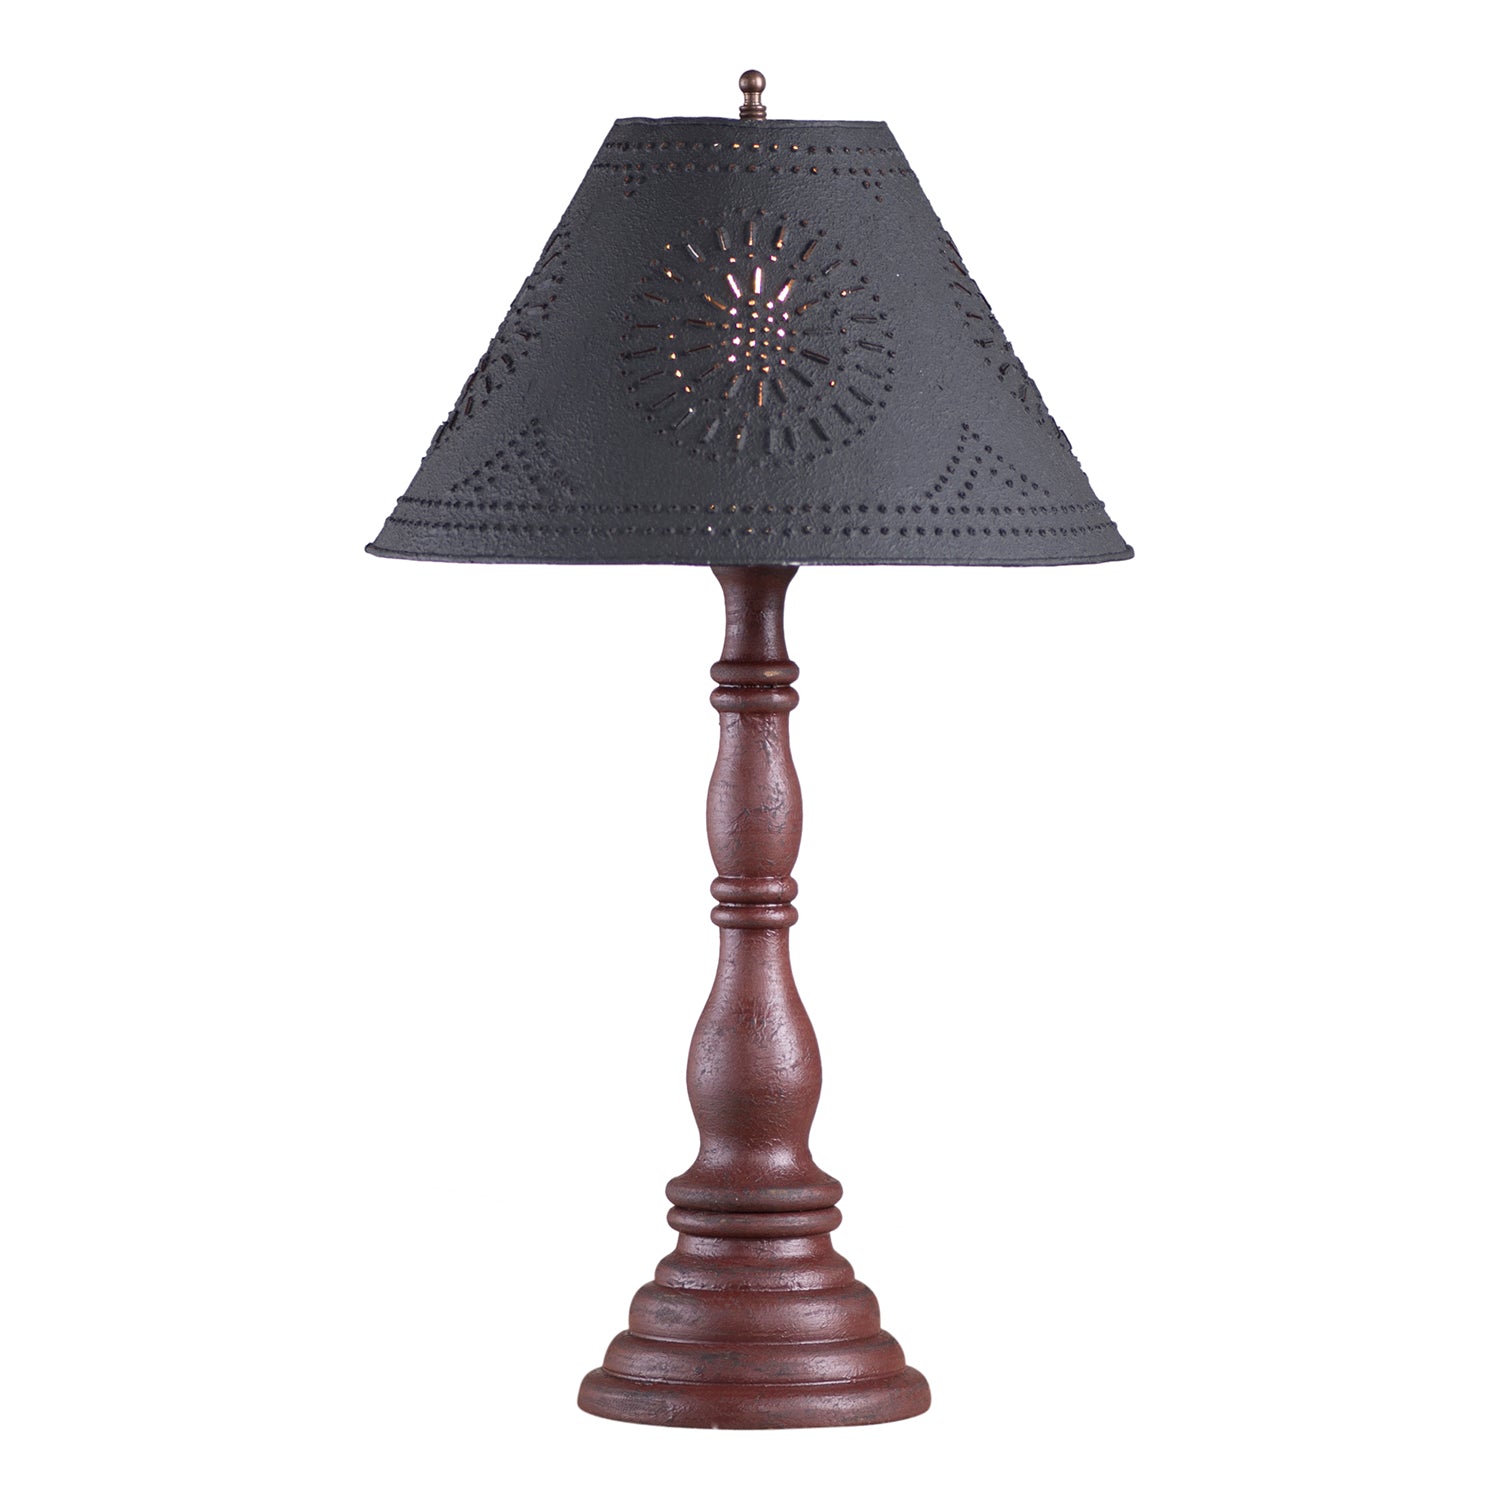 Davenport Lamp in Americana Red with Textured Black Tin Shade